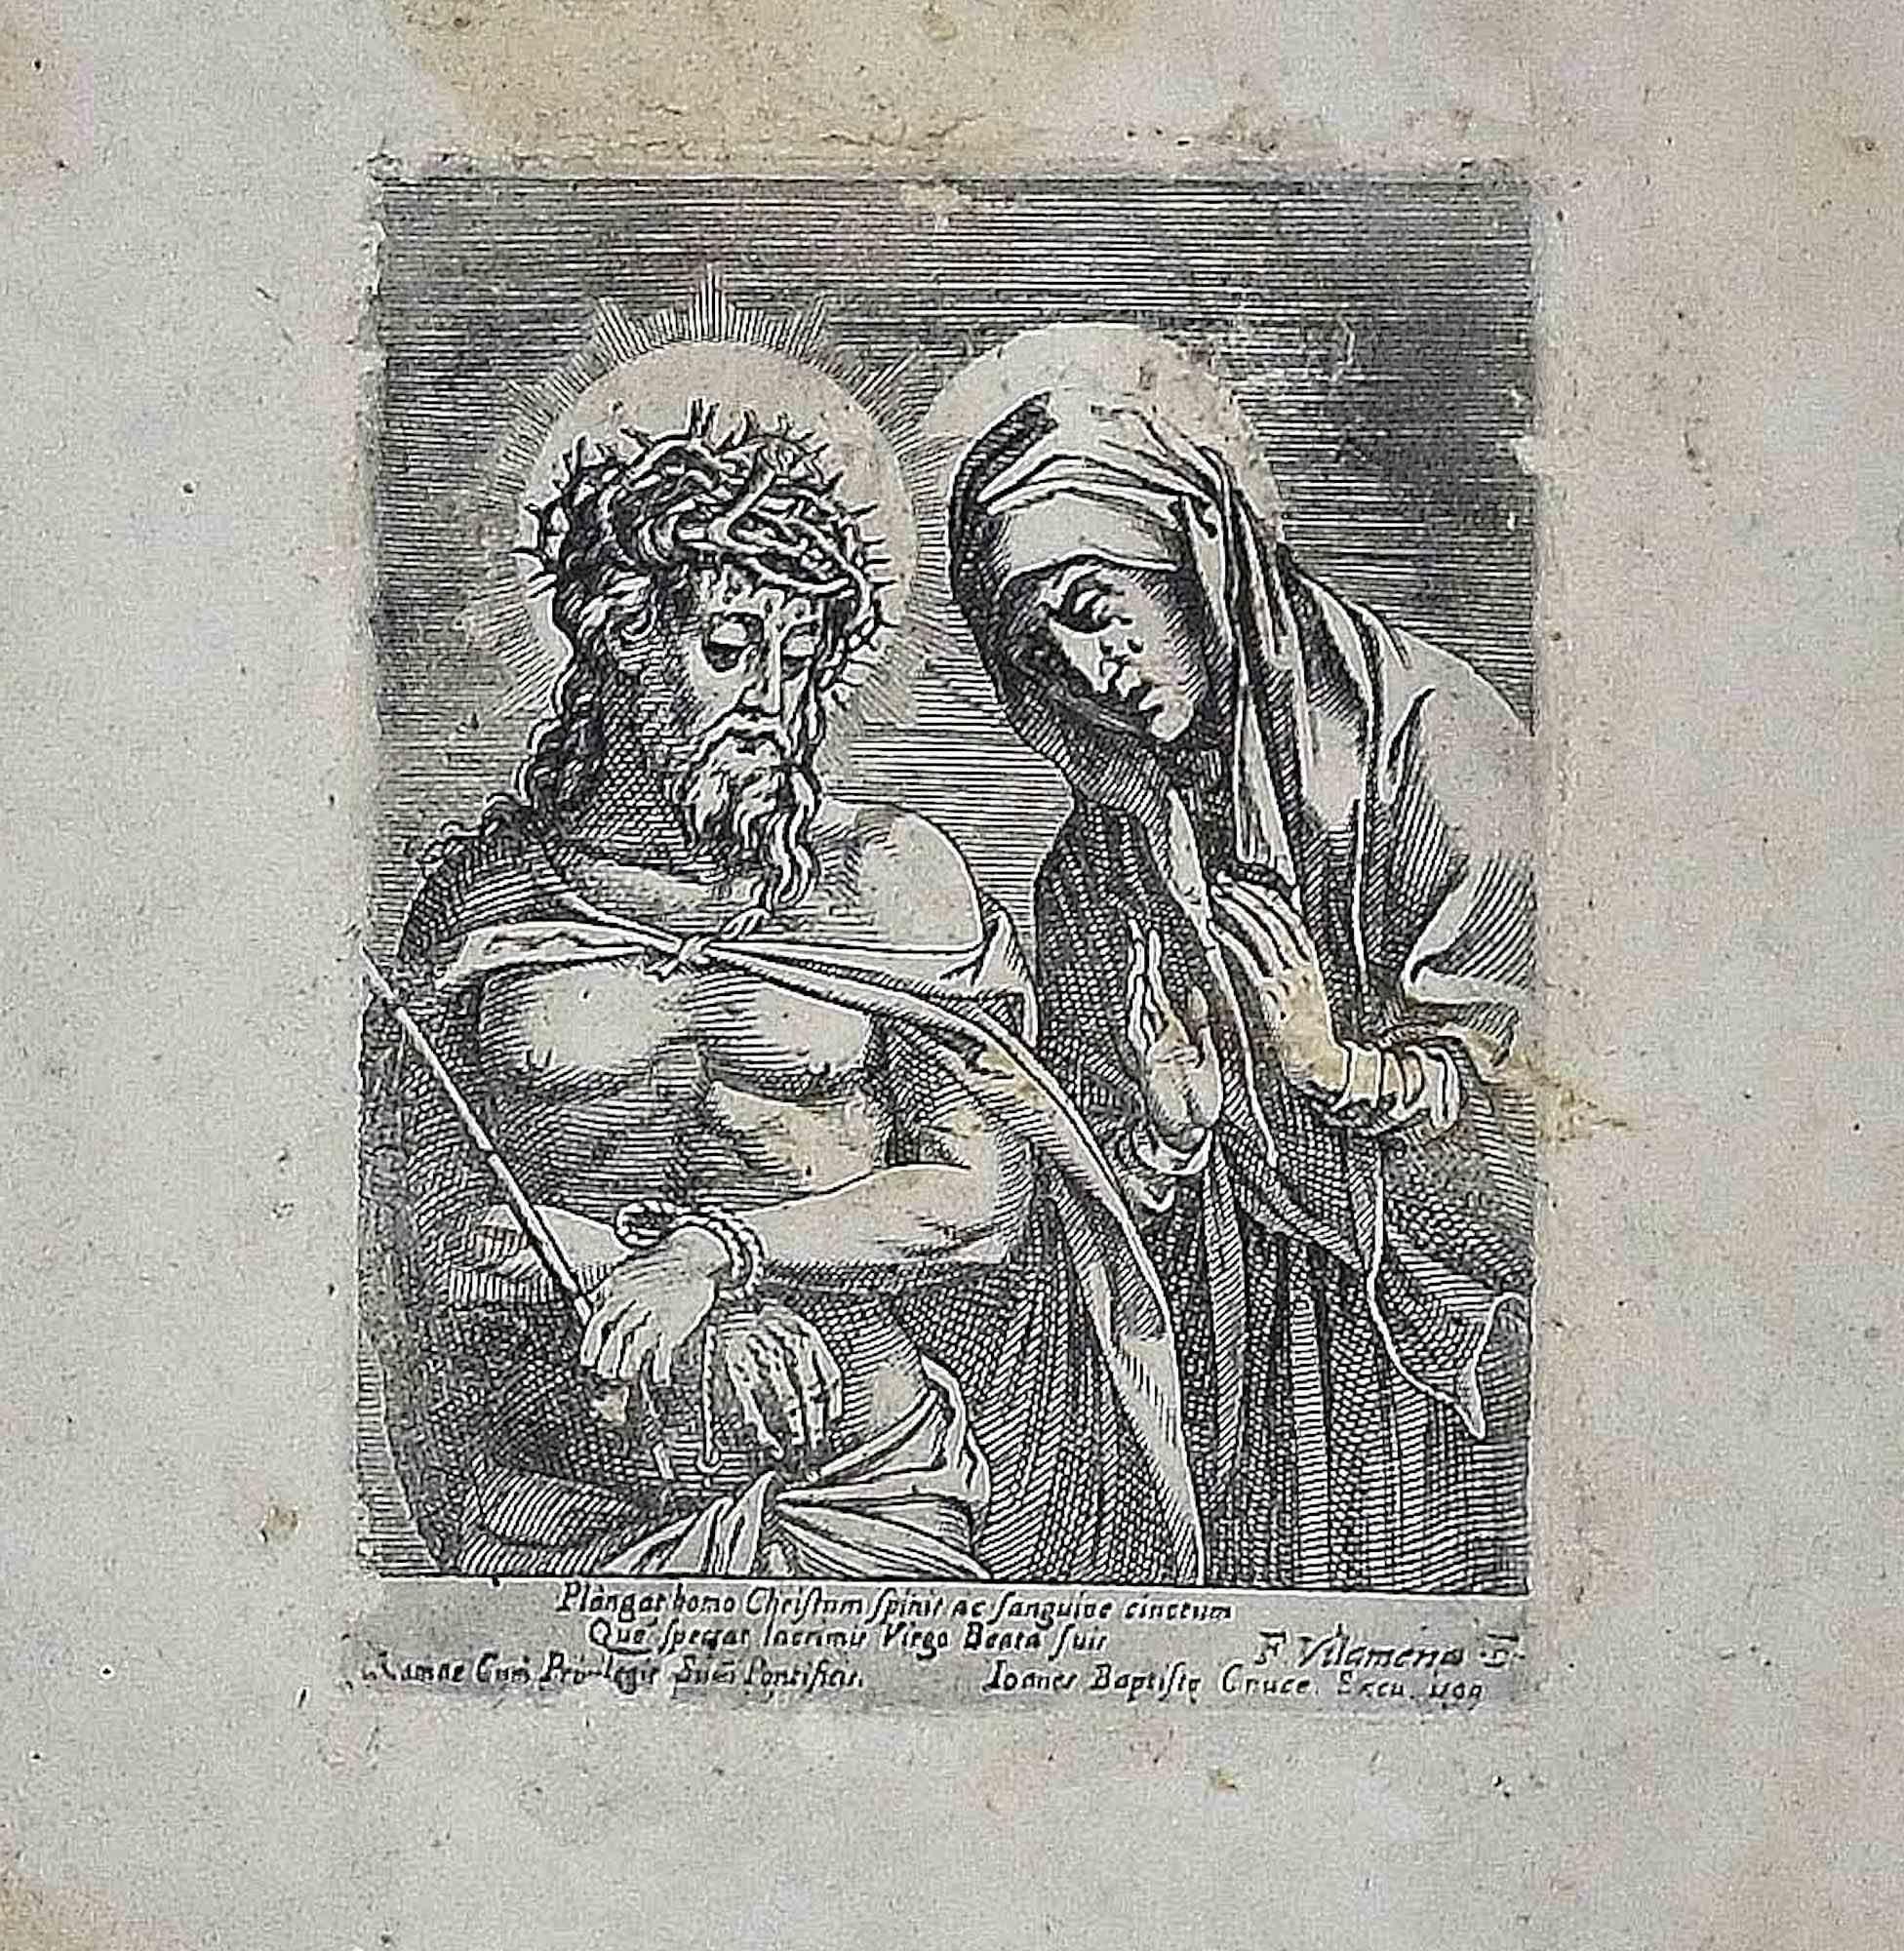 Unknown Figurative Print - Jesus and Virgin Mary - Etching - Late 18th Century